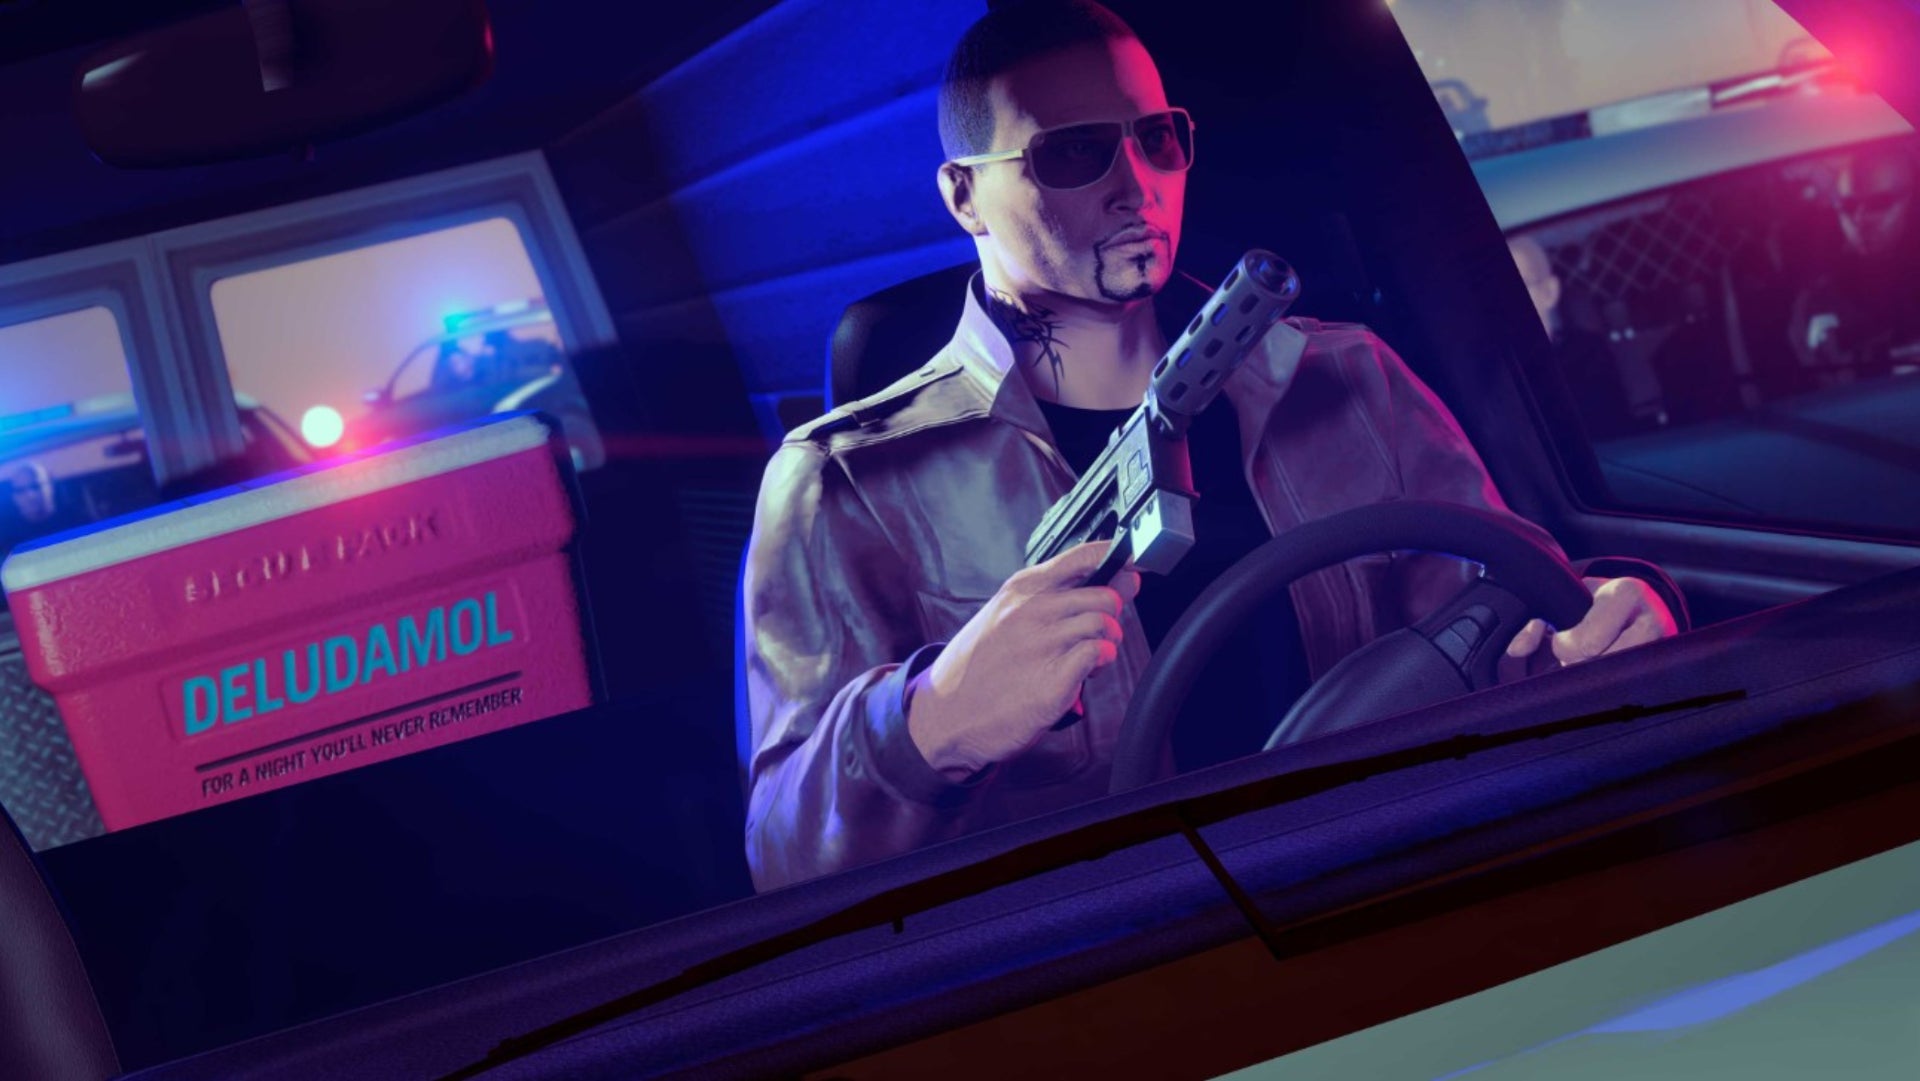 GTA Plus official Rockstar Newswire image of a character holding a gun in a cab